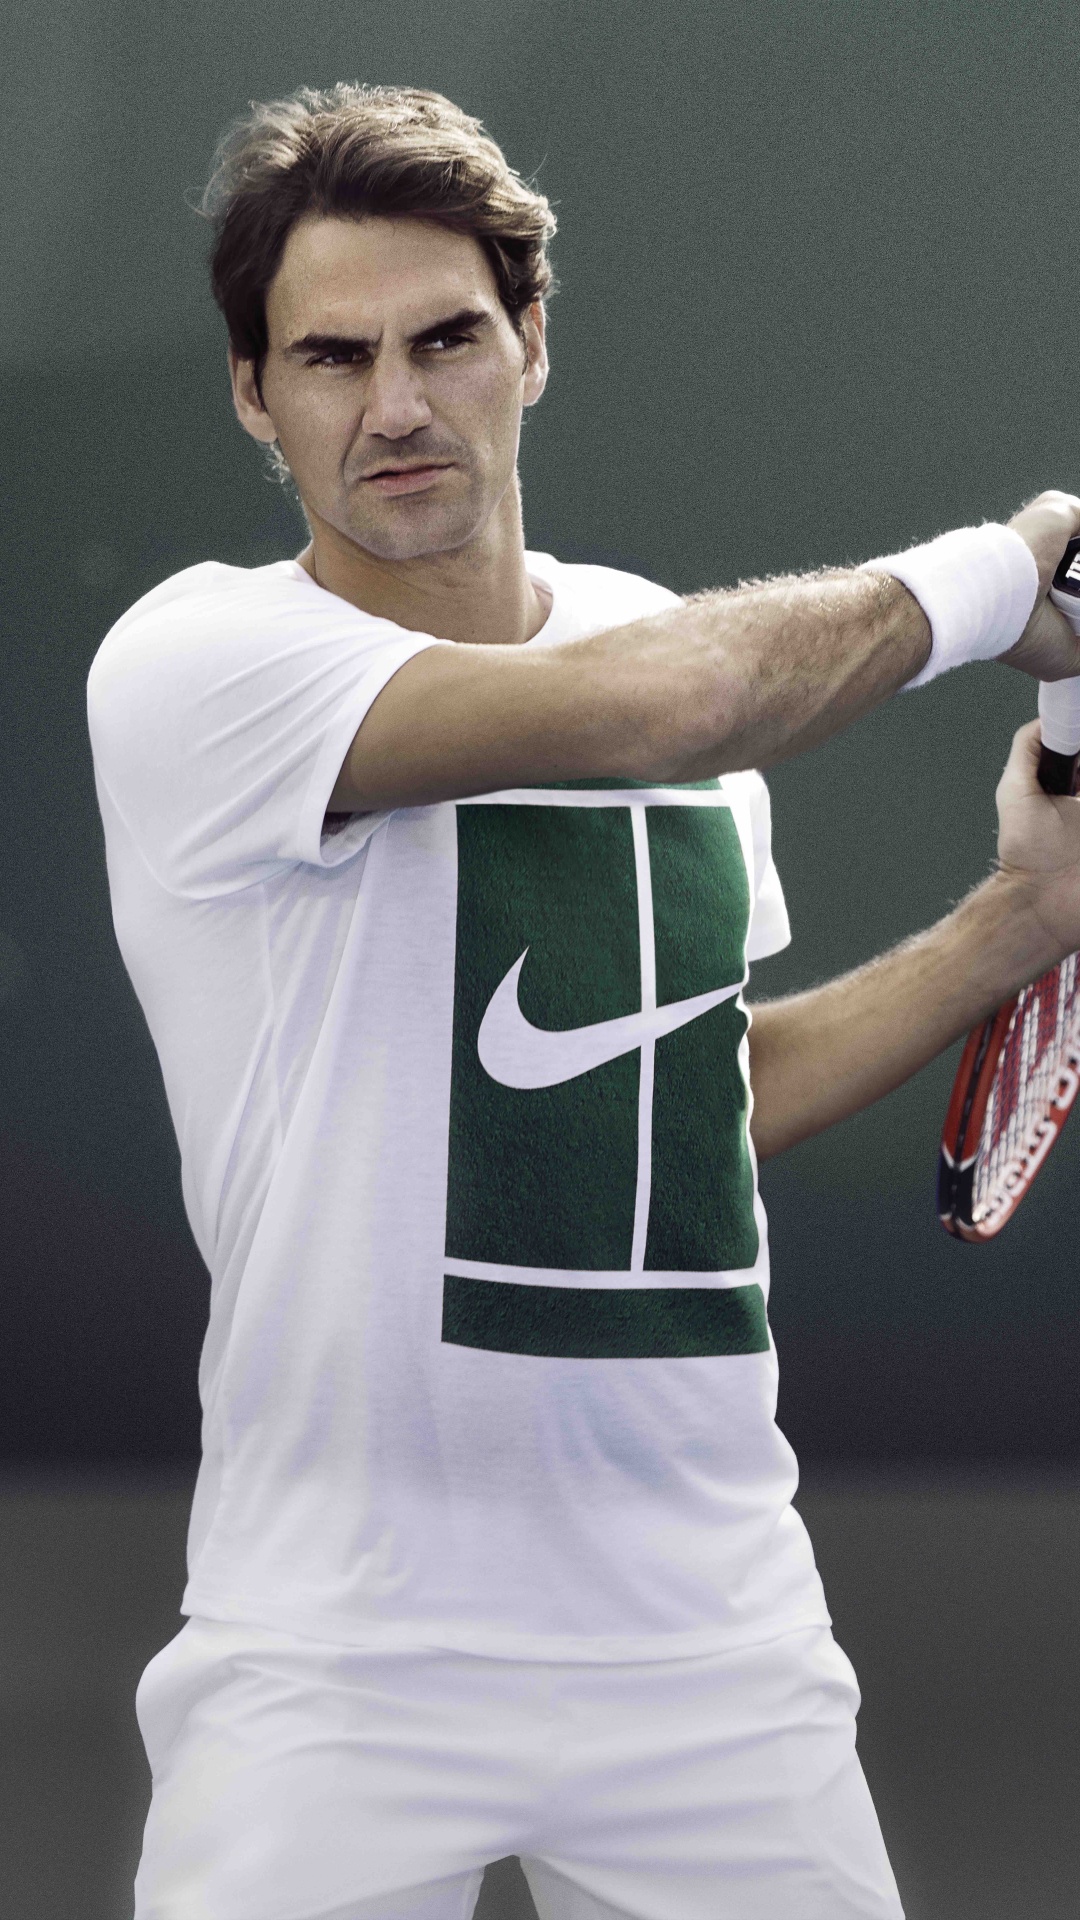 Man in Green and White Nike Jersey Shirt Holding Red and White Tennis Racket. Wallpaper in 1080x1920 Resolution